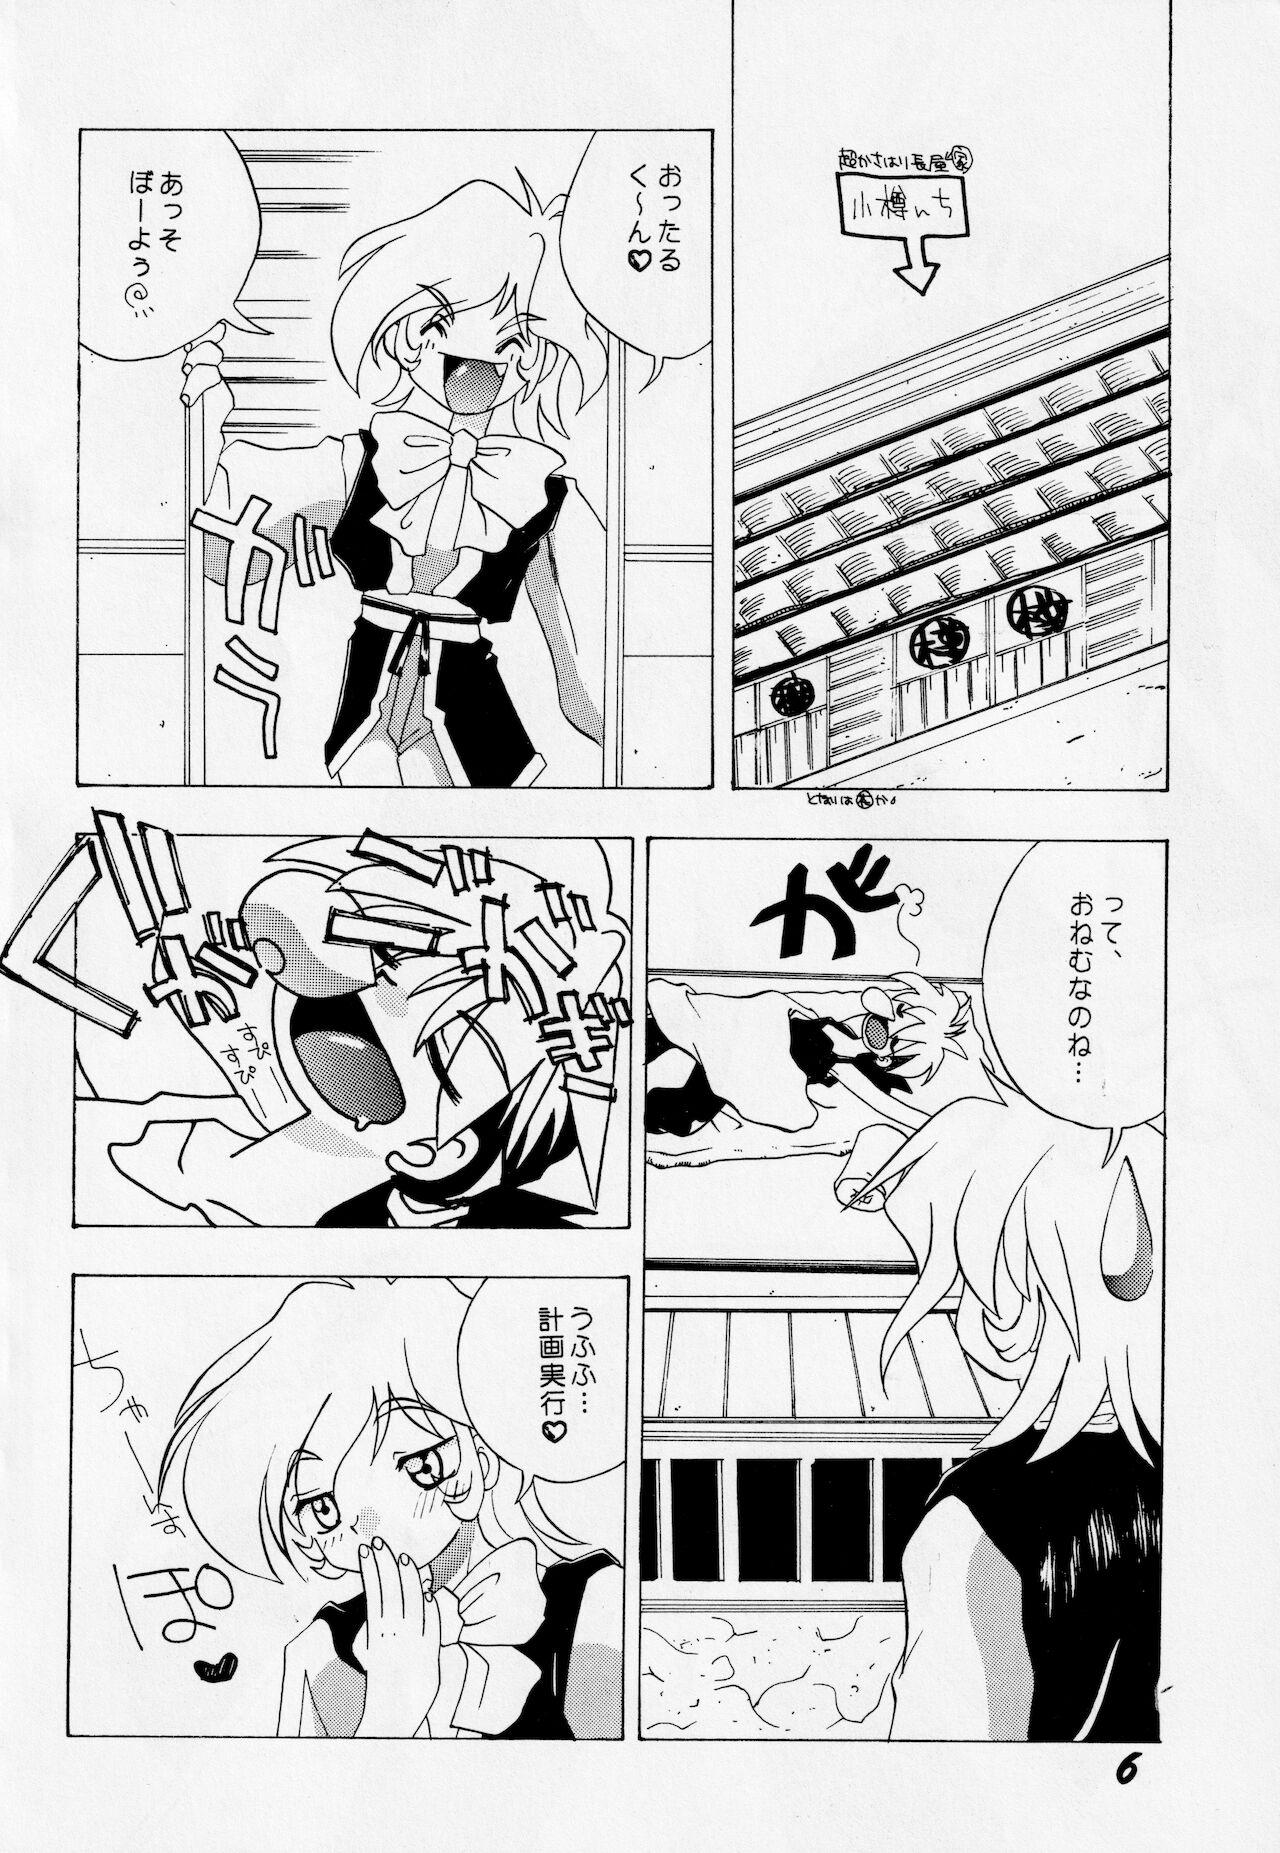 Stud Abaredaiko 2 - Saber marionette Gay Cock - Page 5